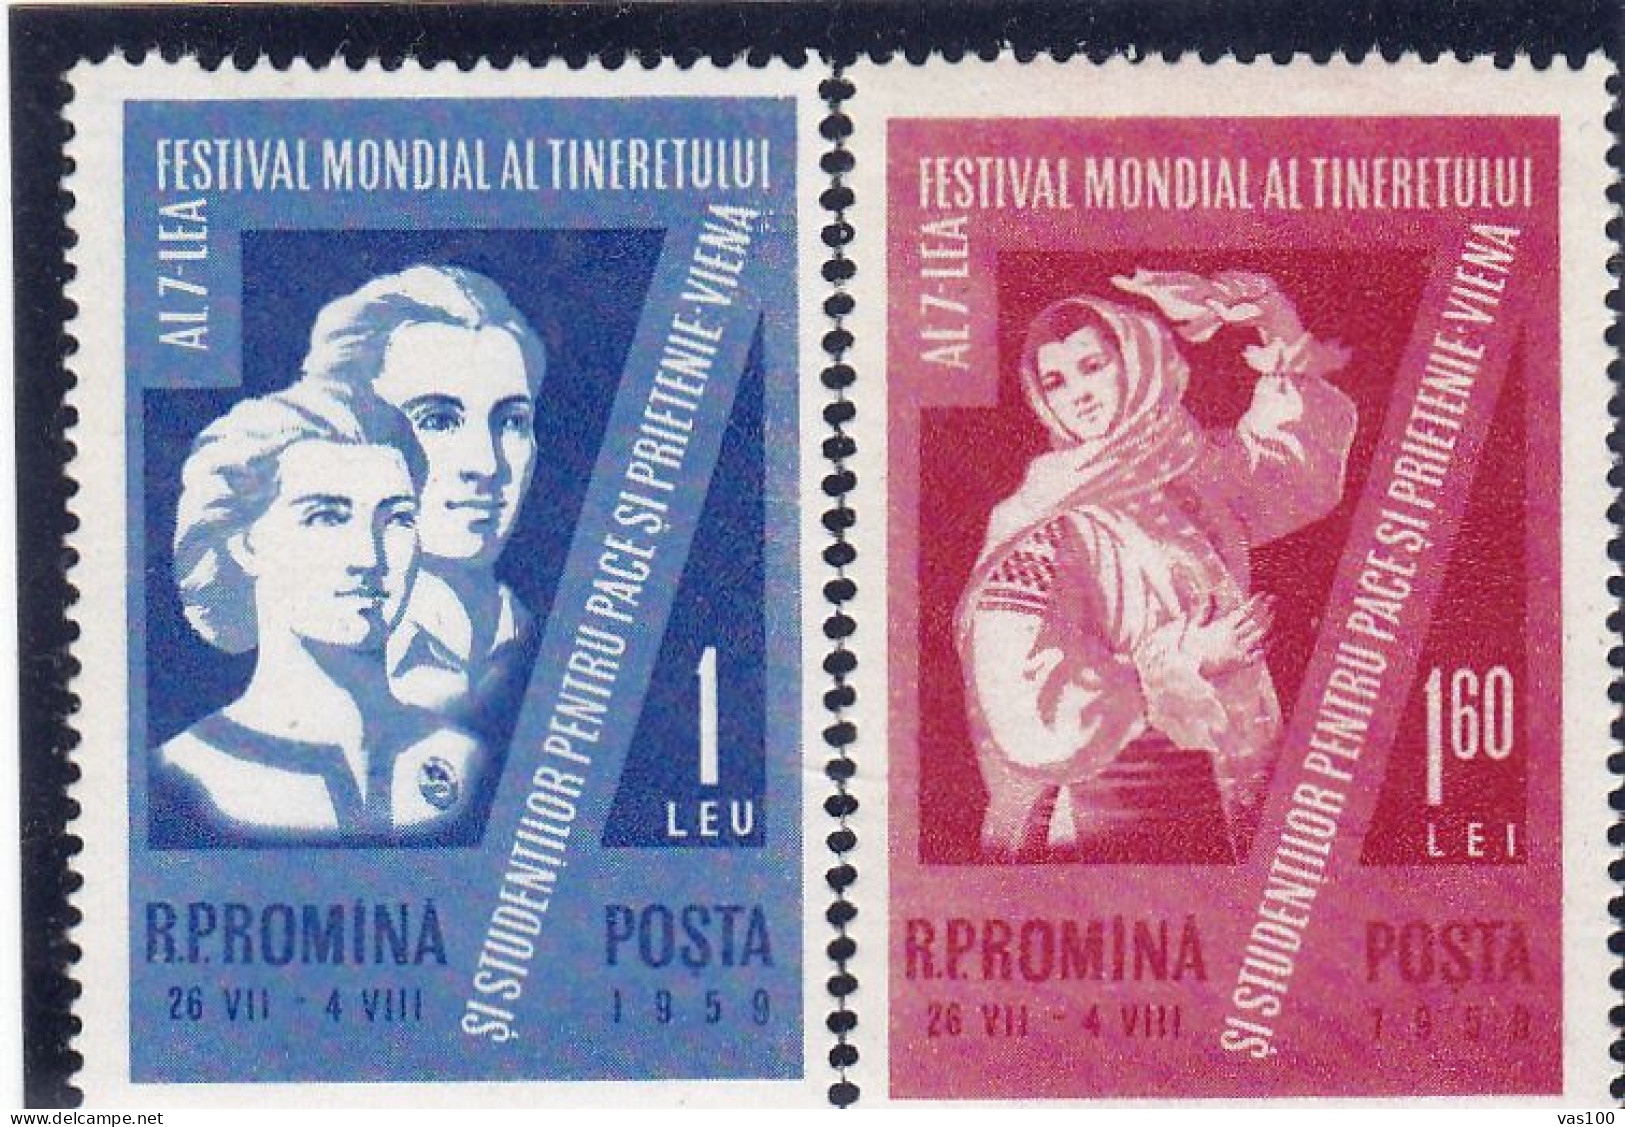 YOUTH,7TH YOUTH FESTIVAL-WIEN,1959,MI.1790/91, MNH**, ROMANIA. - Unused Stamps